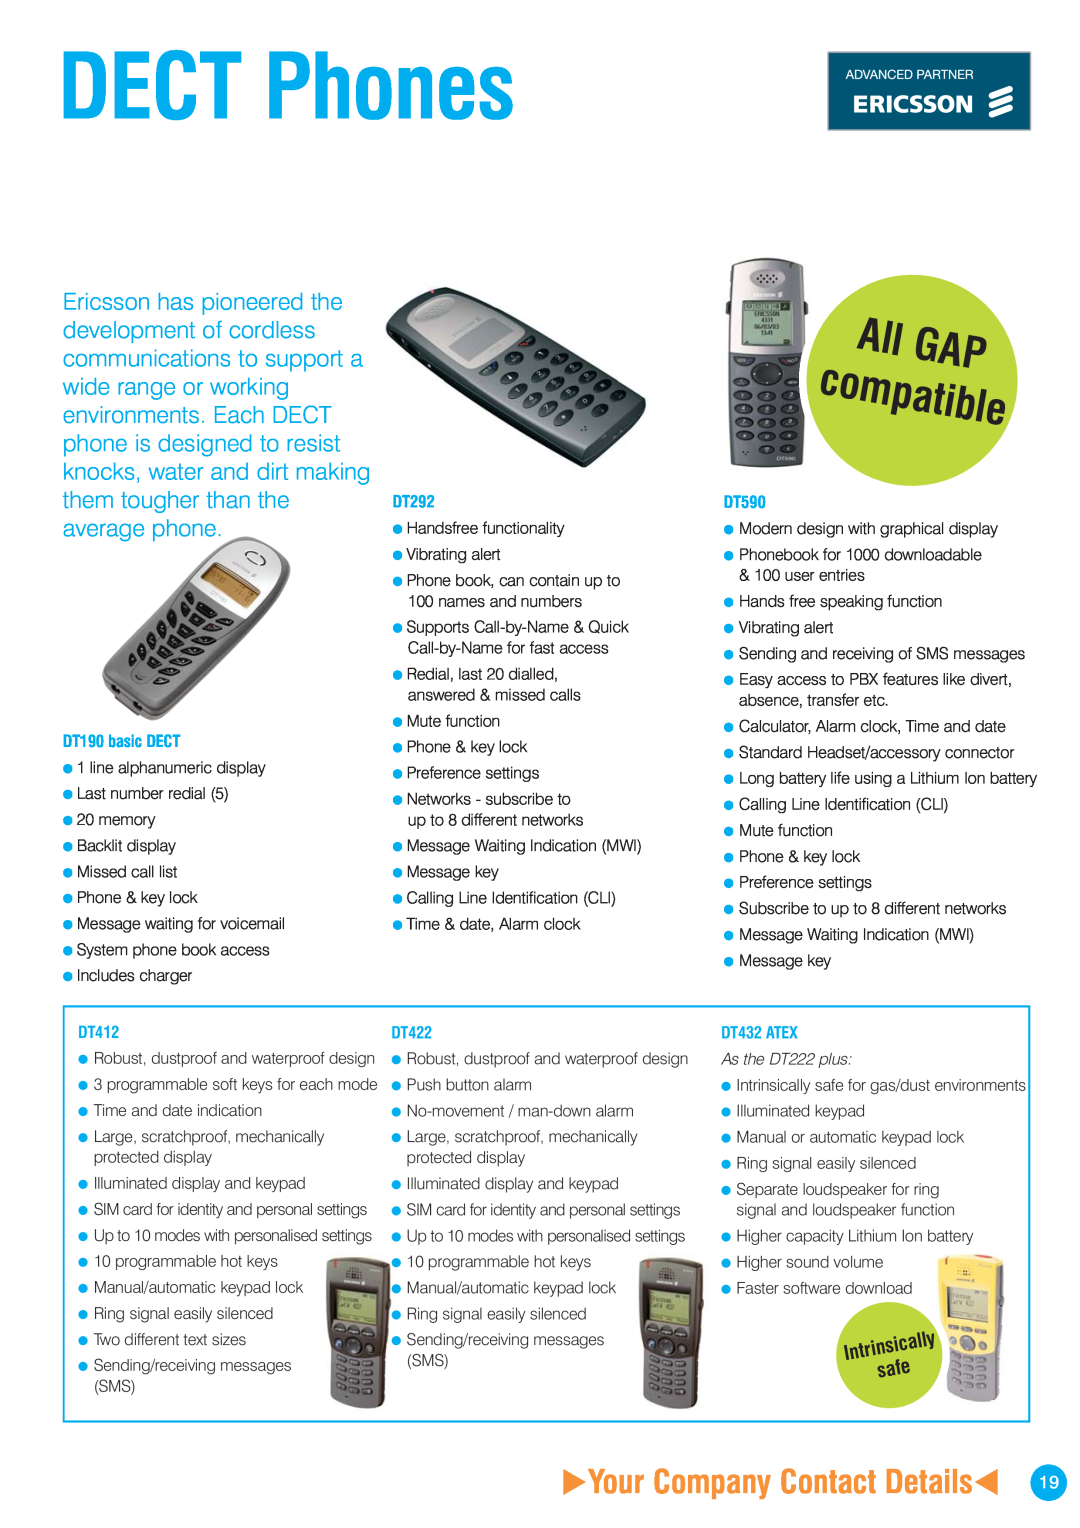 Ericsson ISDN2 DECT Phones, All GAP compatible, Your Company Contact Details, Intrinsically safe, DT190 basic DECT, DT292 